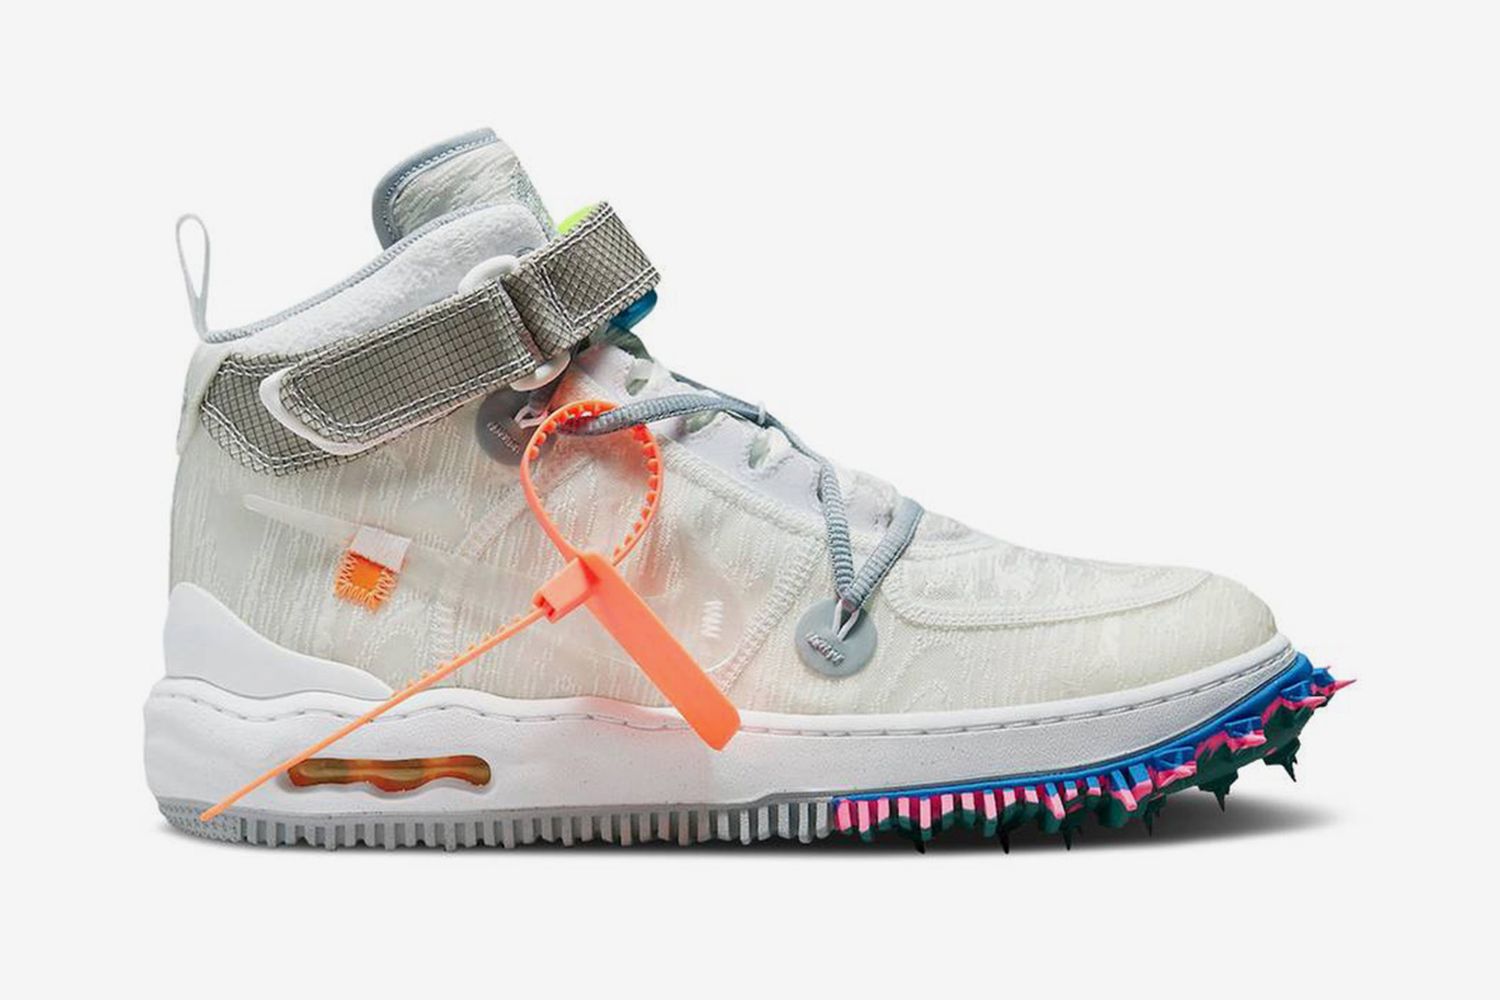 Nike air force stockx x Off-White™ Air Force 1 Mid: Where to Buy & Resale Prices